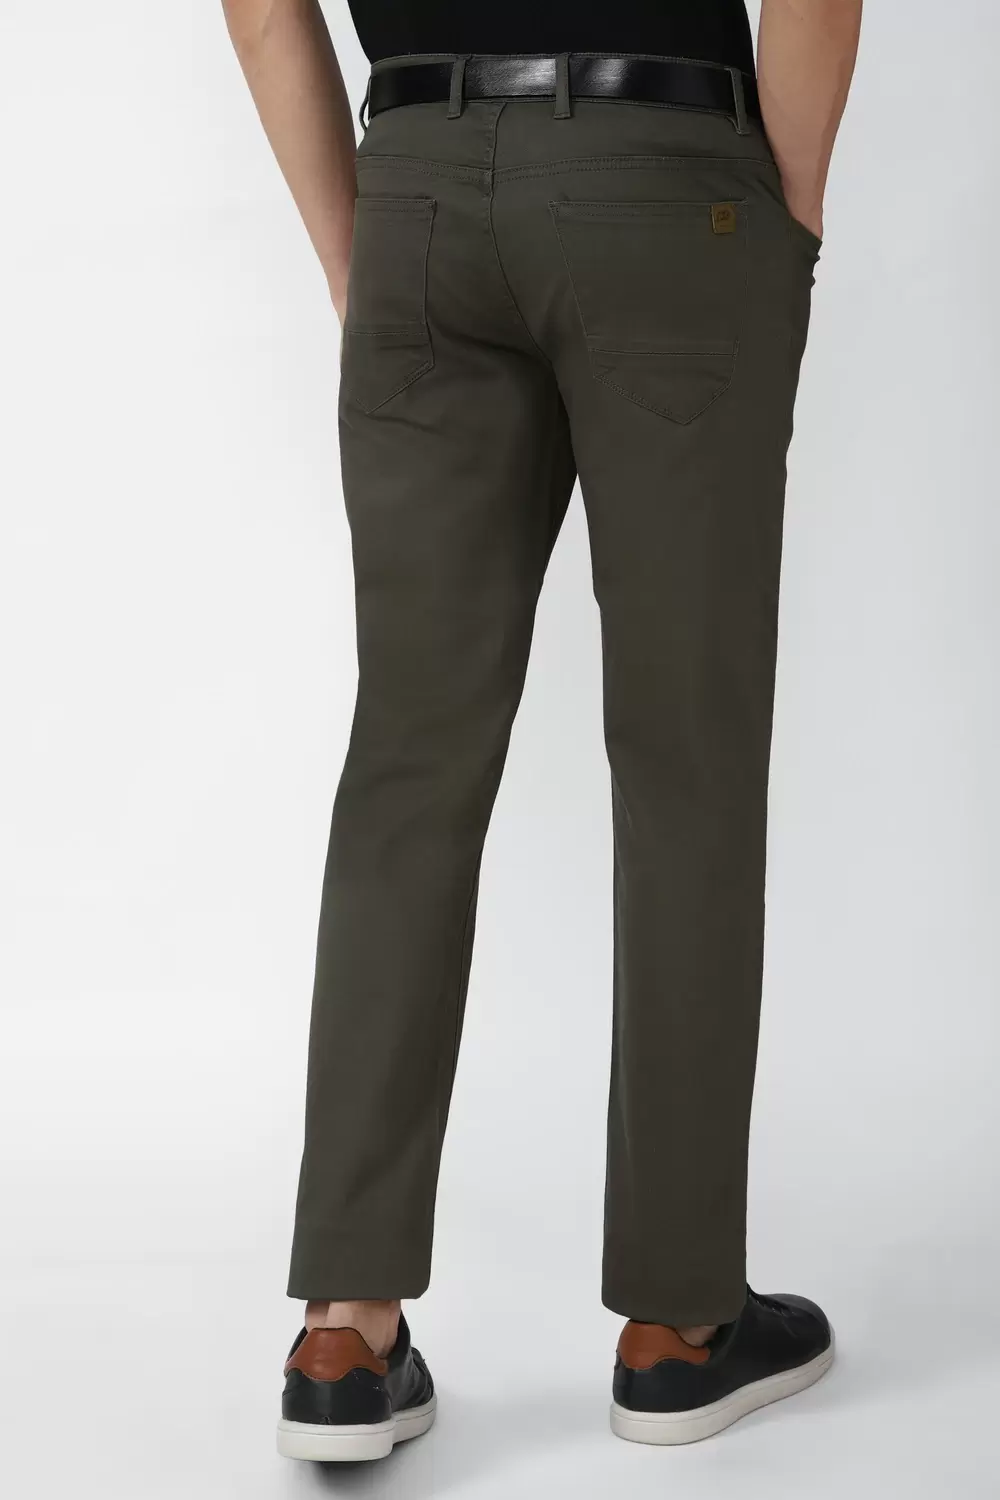 Peter England Brown Trousers at Rs 1299 | New Items in New Delhi | ID:  14288017455